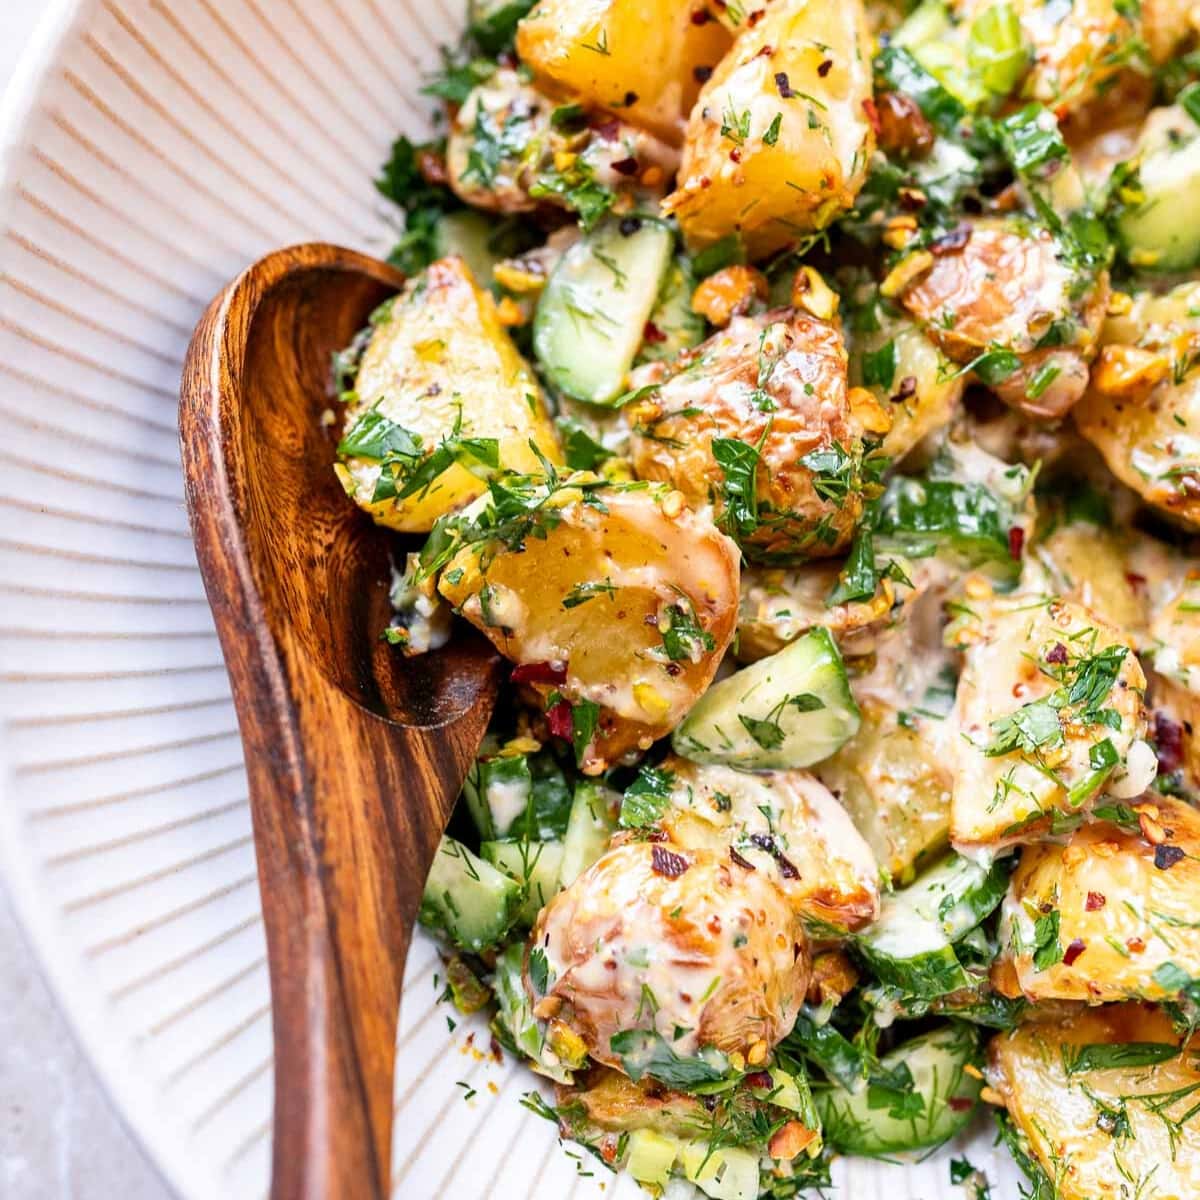 A close shot of a roasted potato salad in a large white bowl with a wooden spoon.